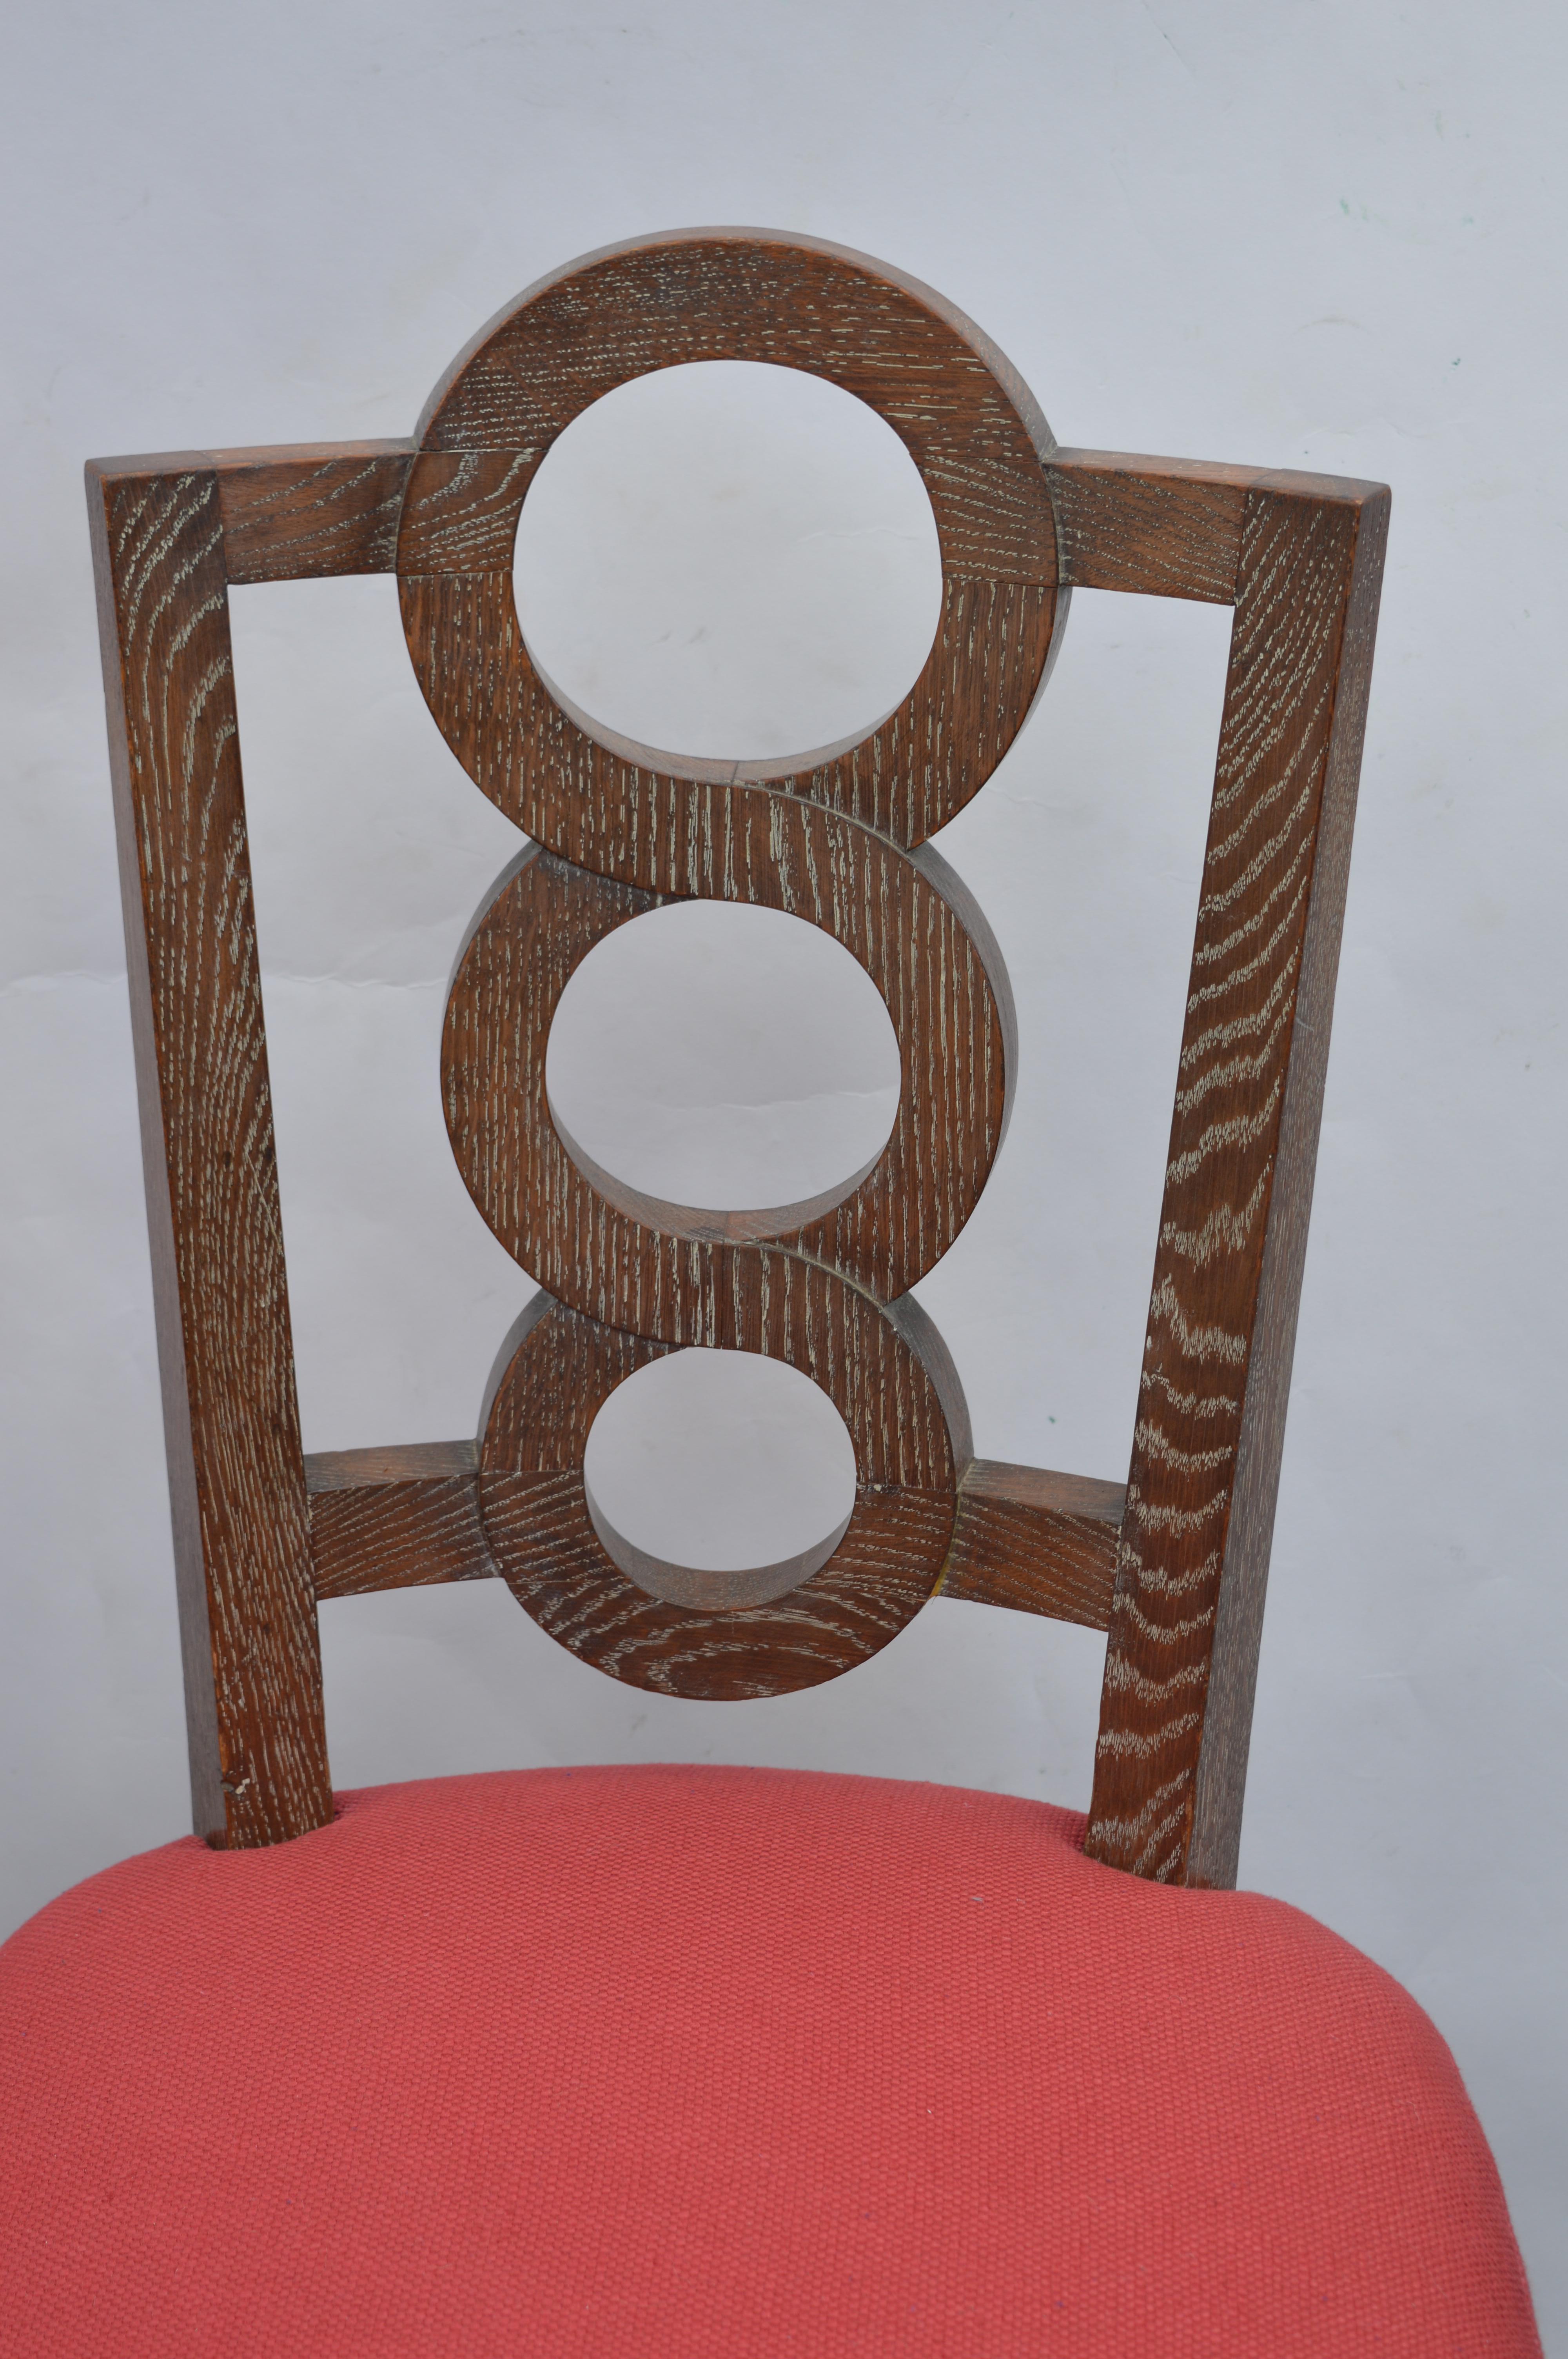 Four 1960s Italian oak chairs with a whitewashed finish and red seats.